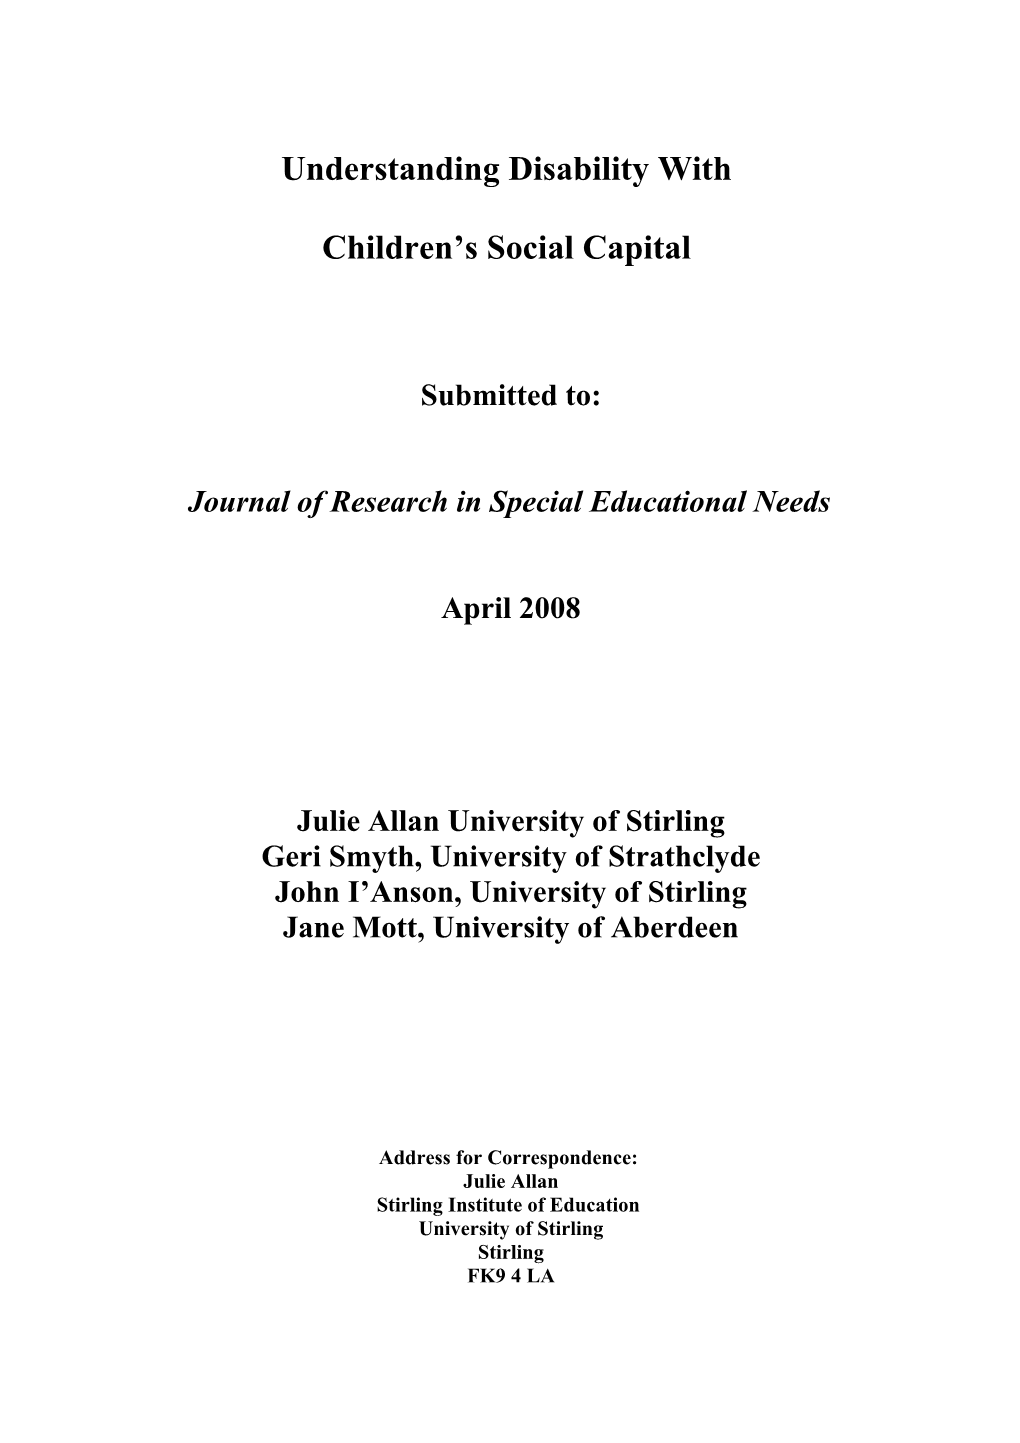 Journal of Research in Special Educational Needs